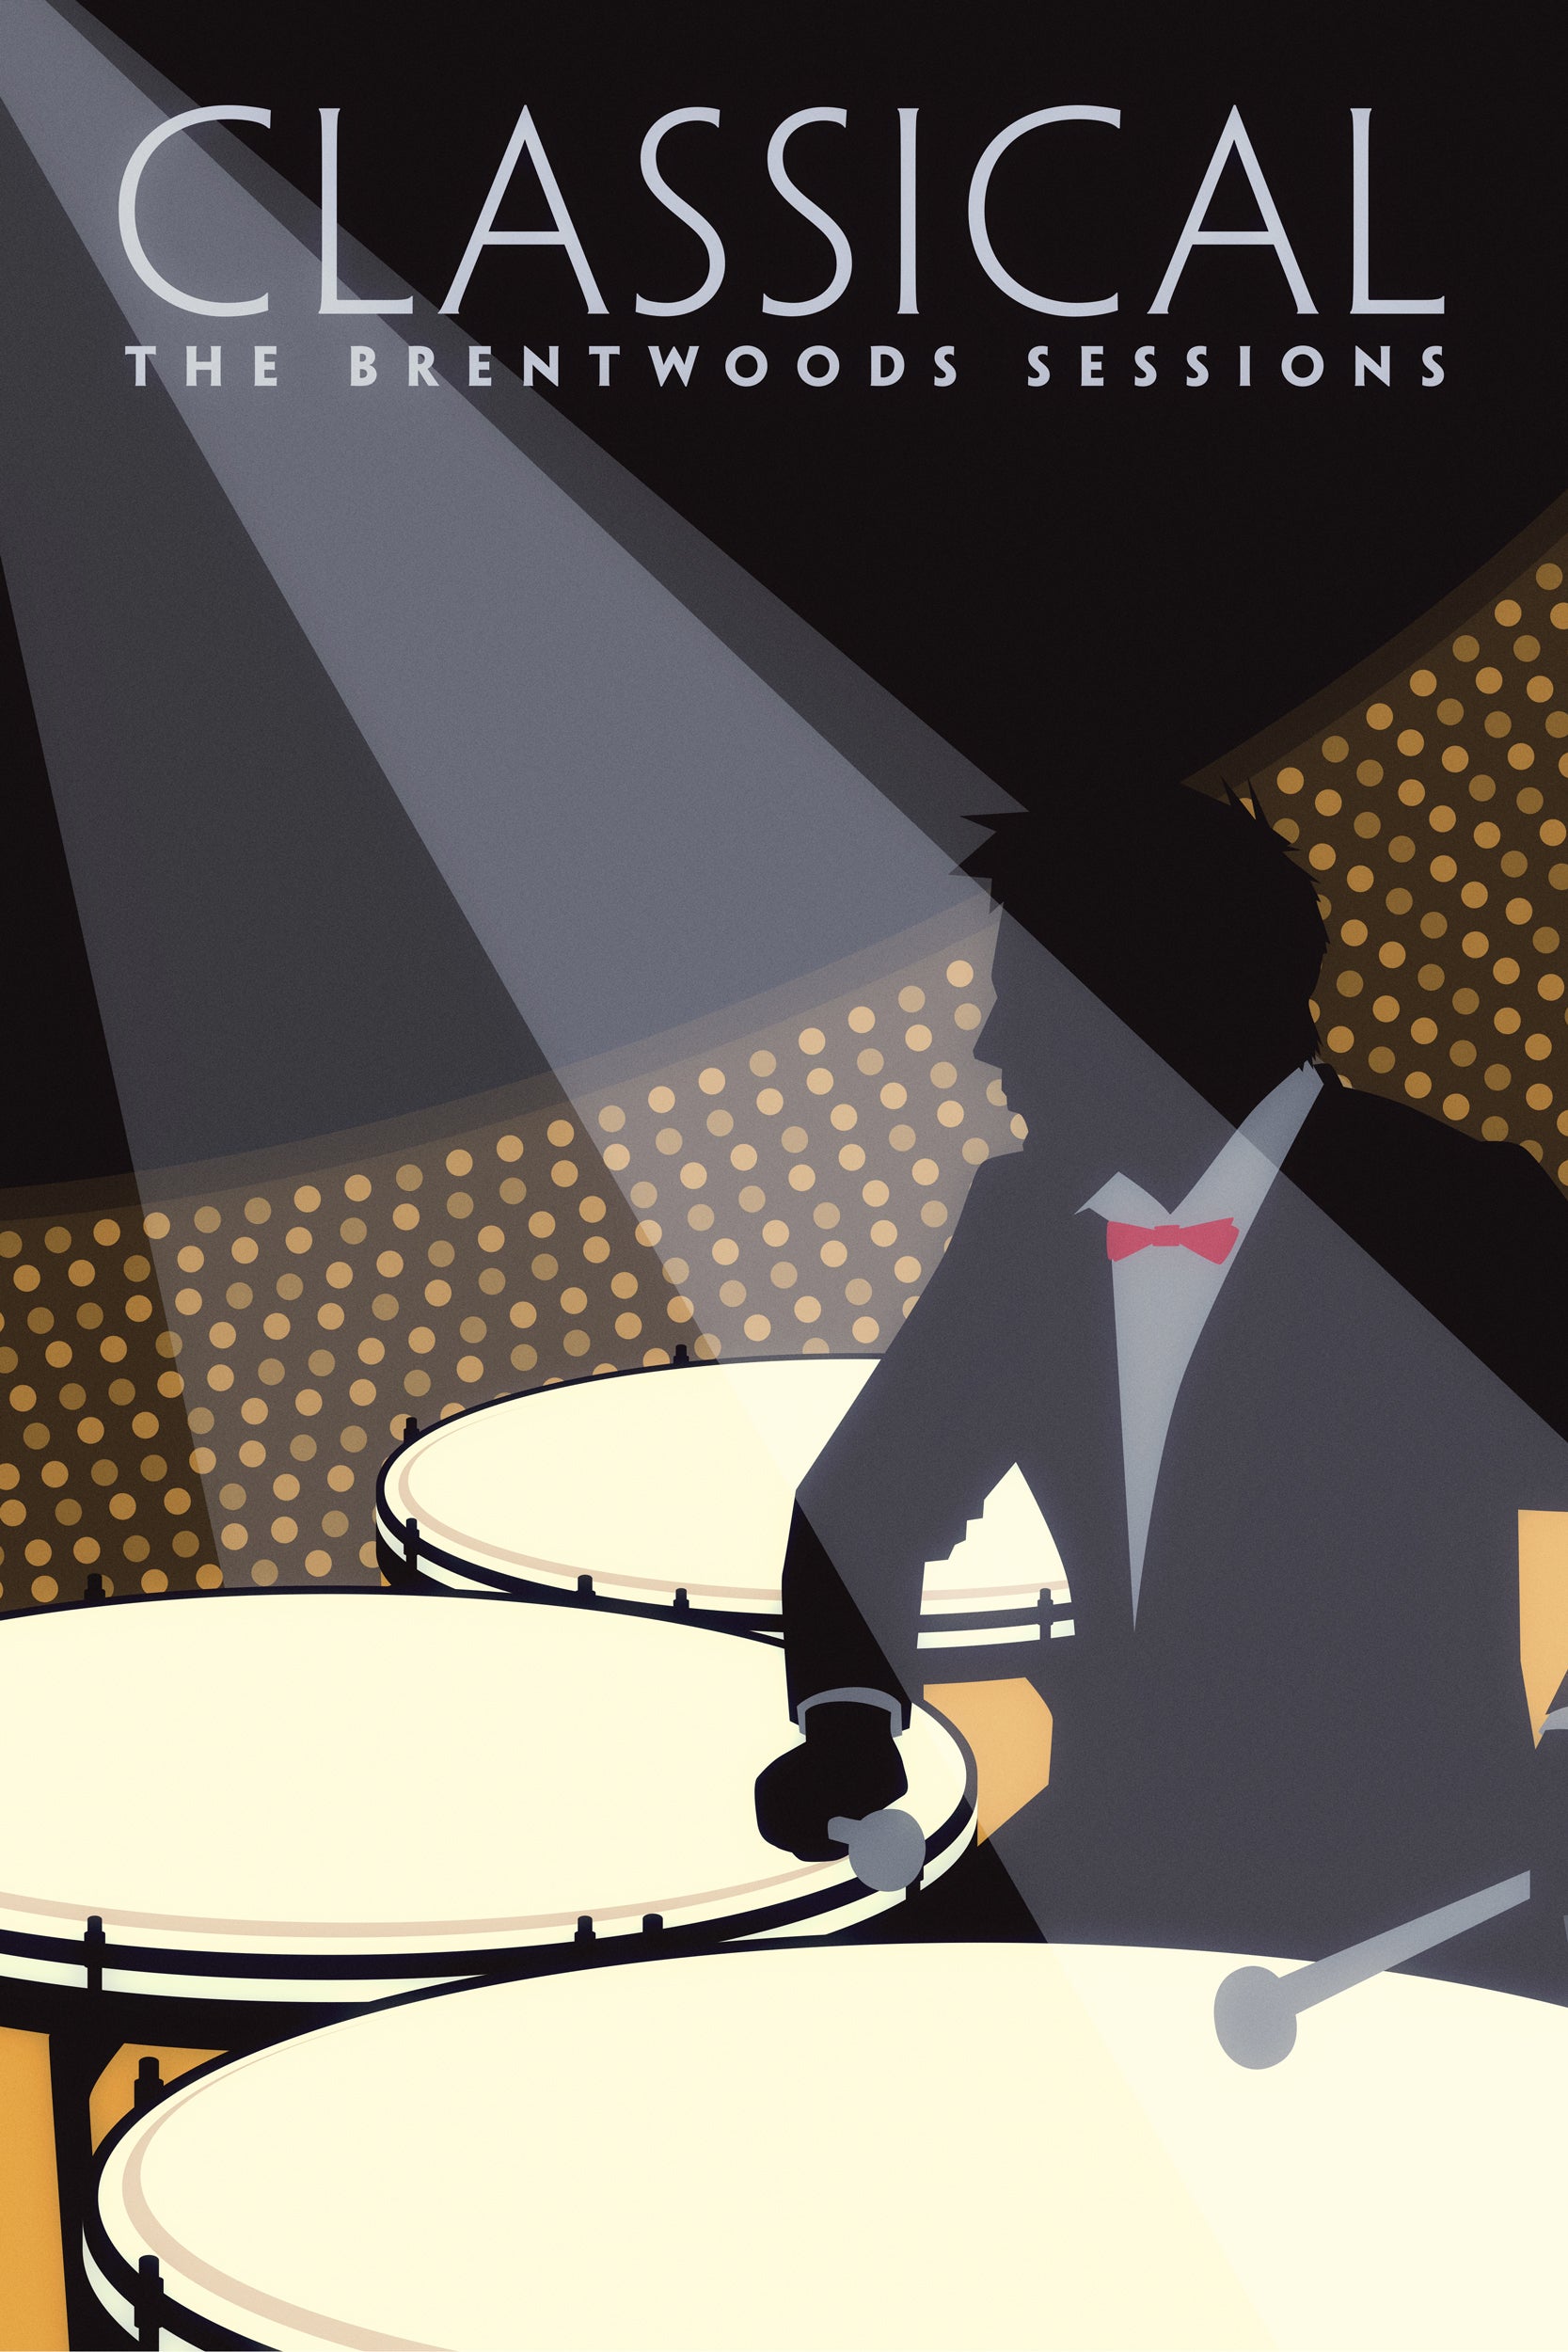 Black graphic art print poster of a male Timpani player with spotlights.